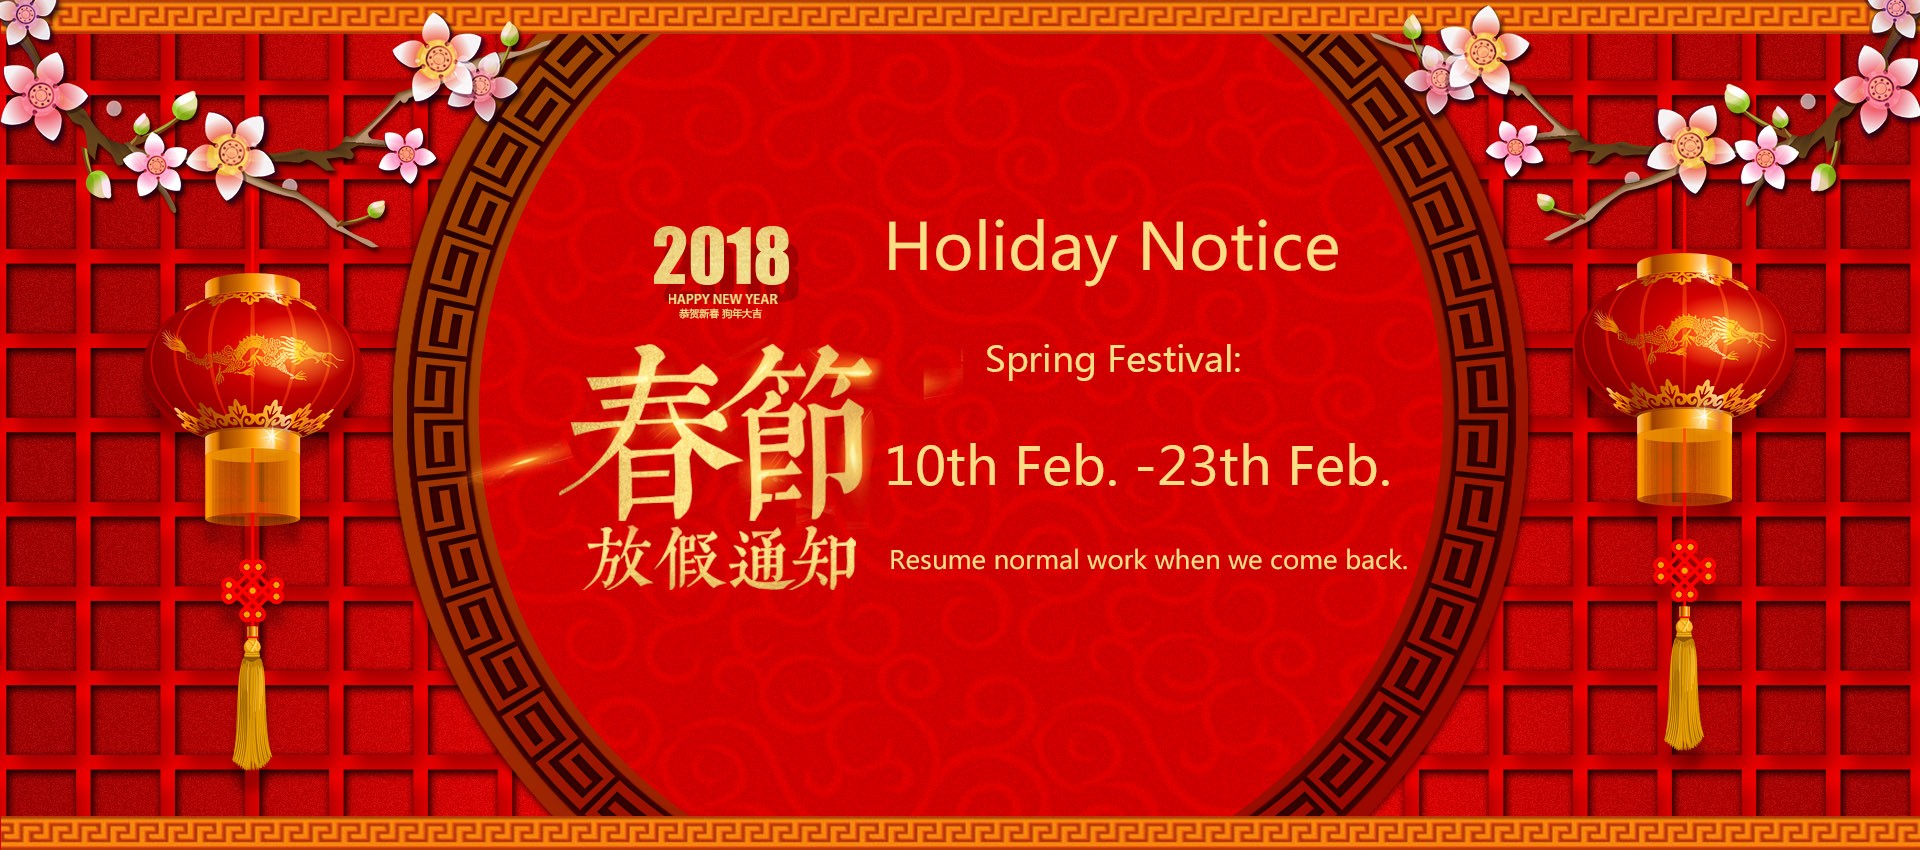 Holiday Notice of Spring Festival 2018